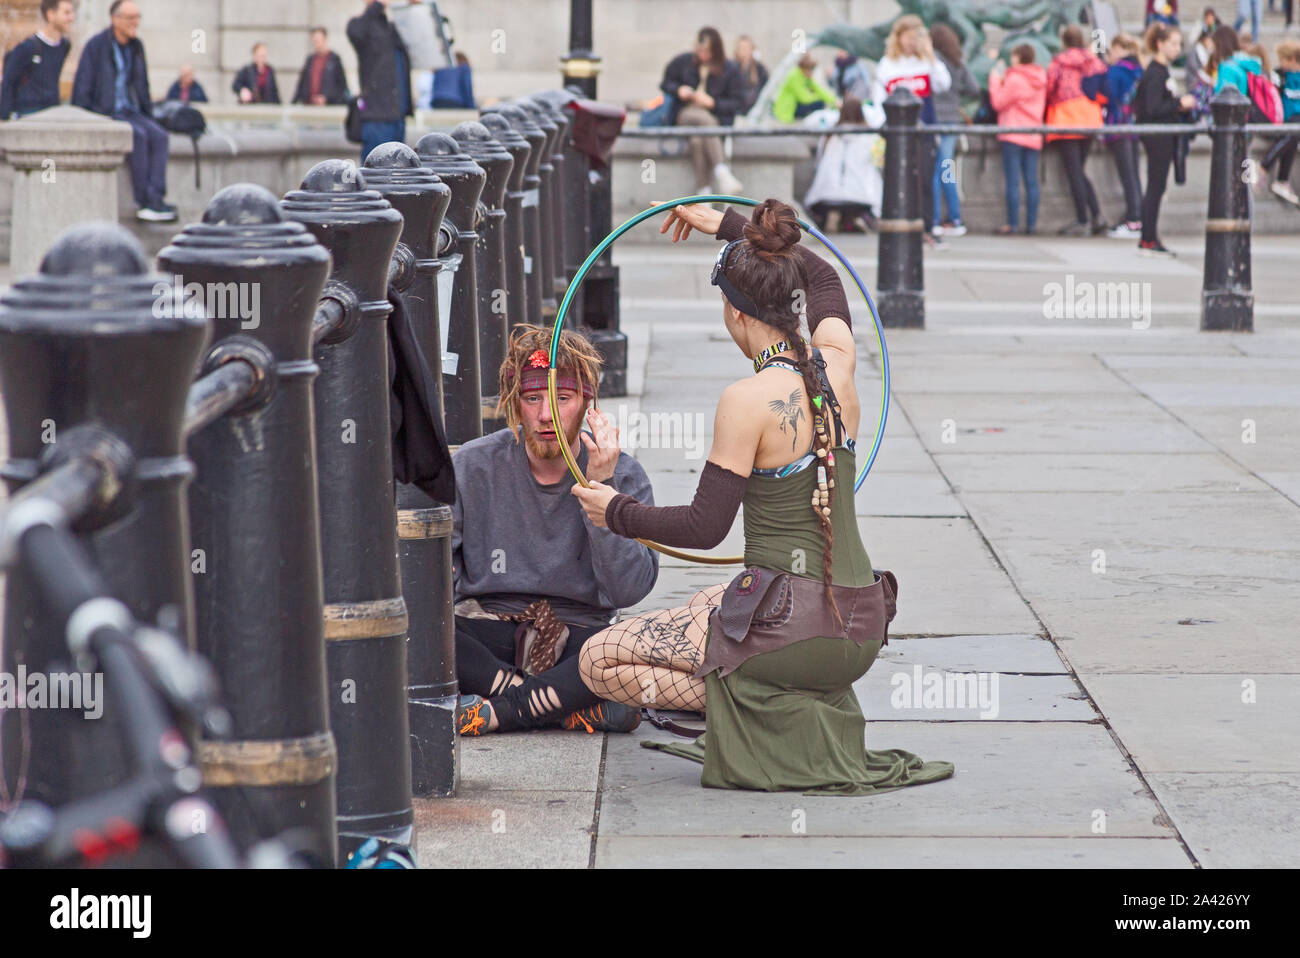 The first day of Extinction Rebellion's occupation of Trafalgar Square.  A demonstrator using her hula hoop to gain her sleepy friend's attention. Stock Photo